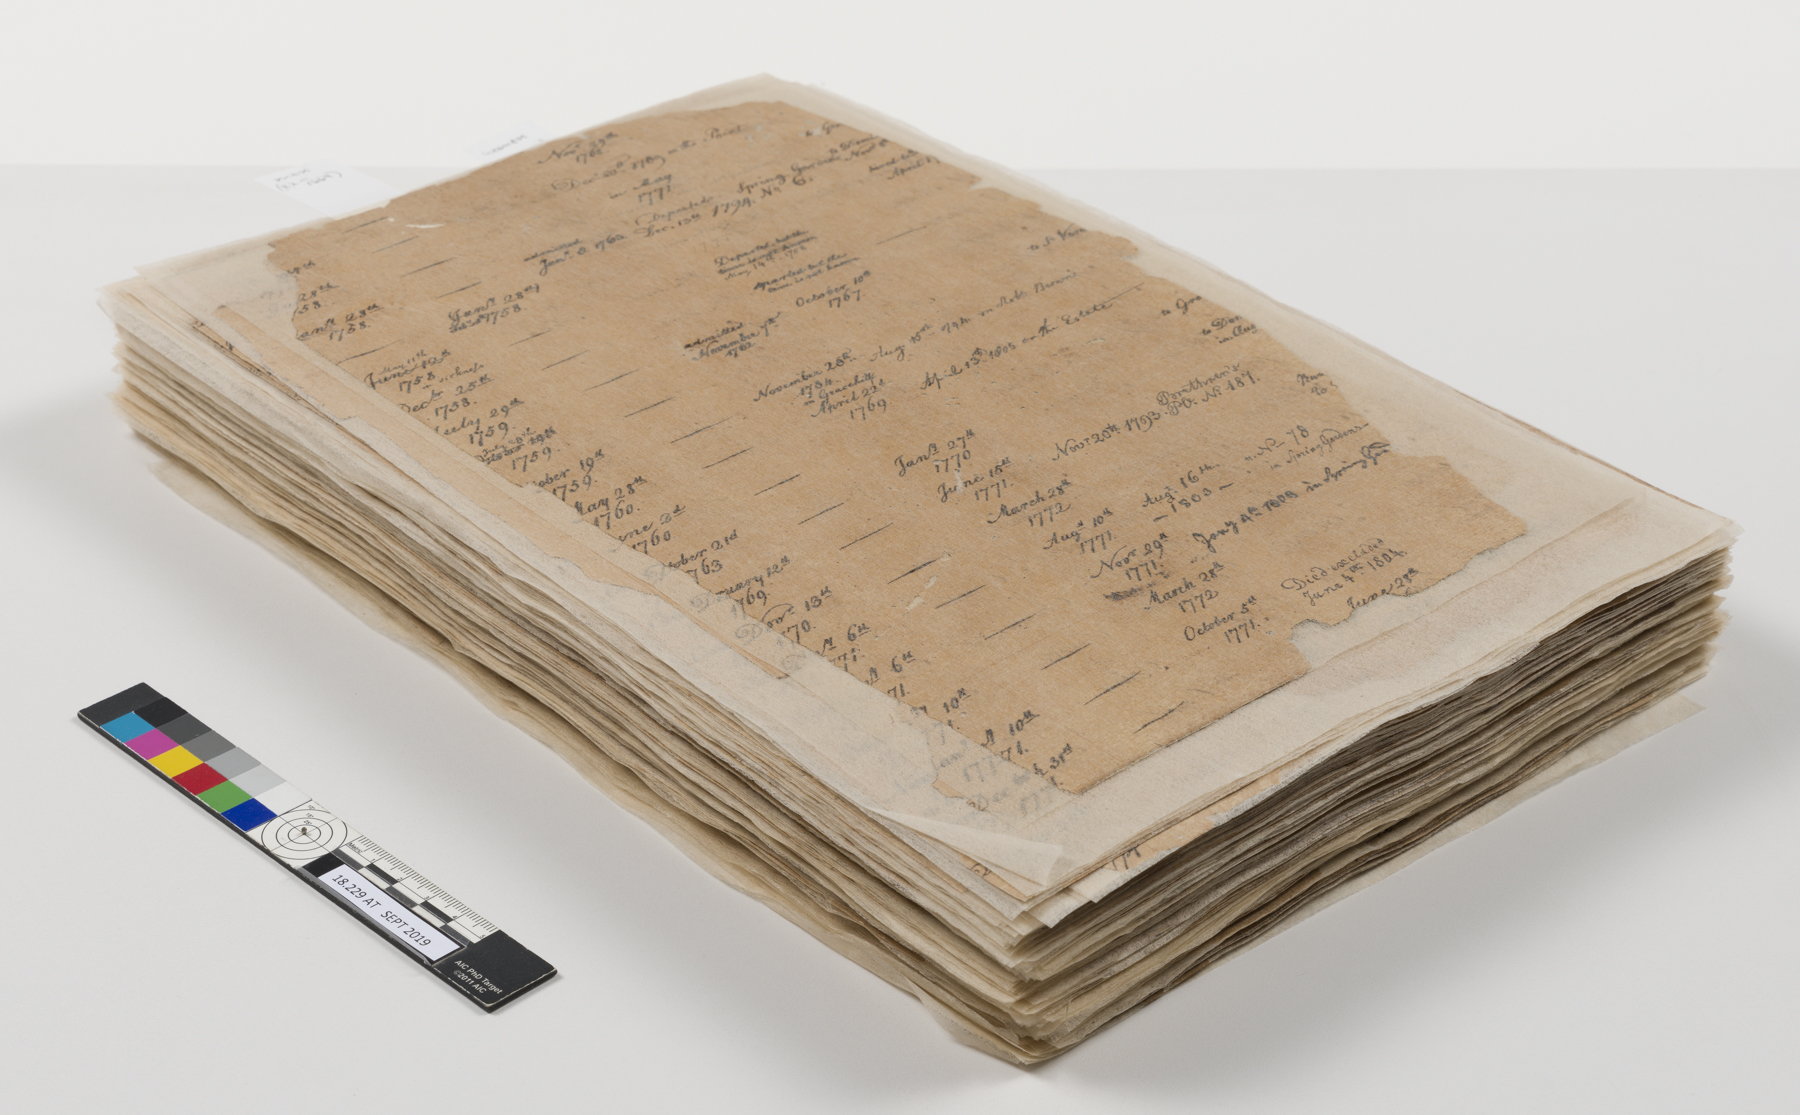 After treatment image of a church register from the Moravian Church in Antigua, 1771-1798